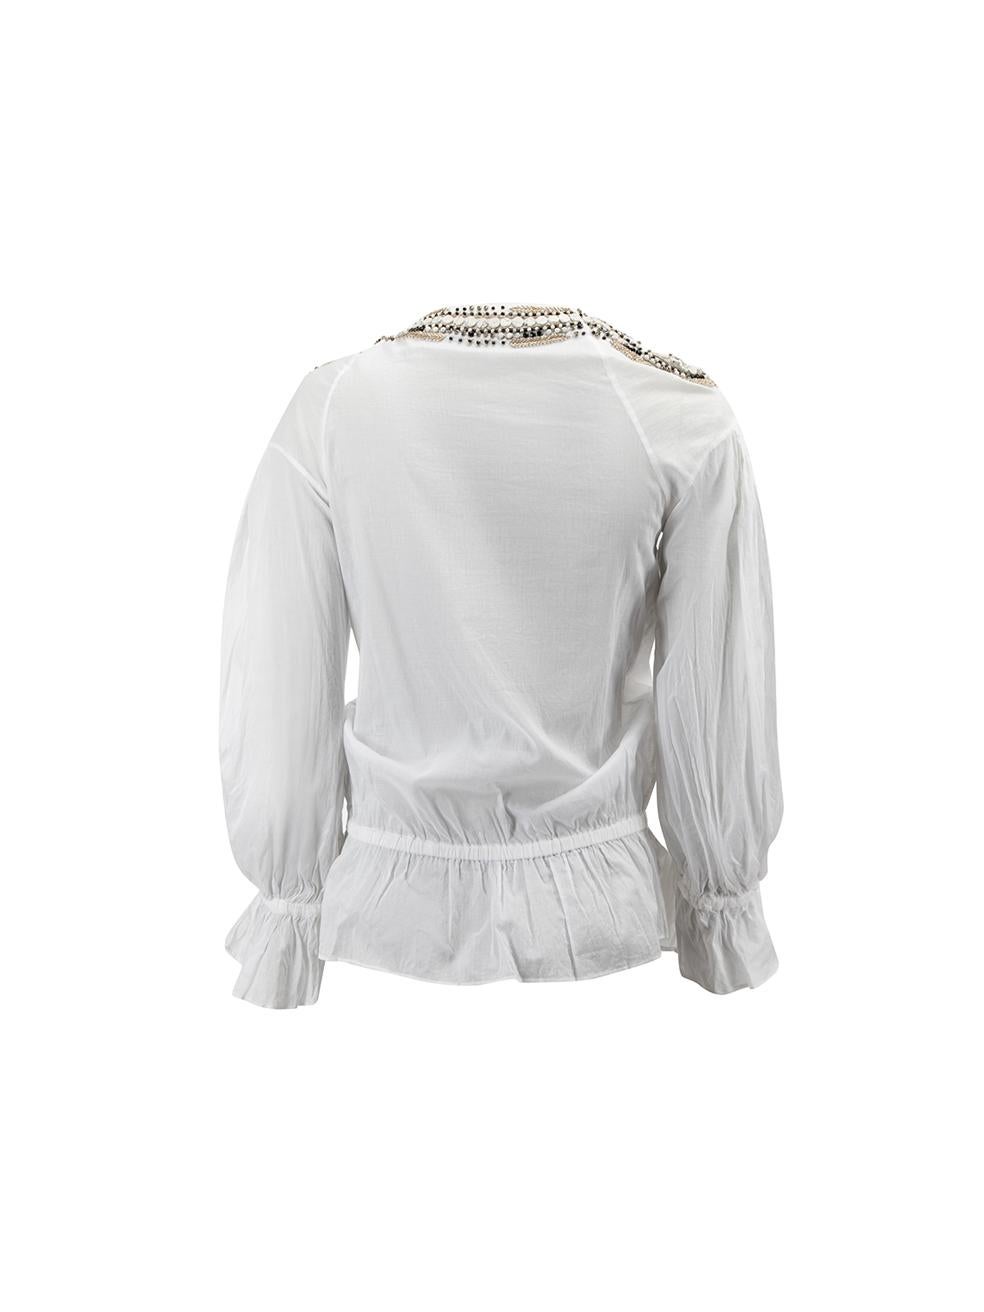 Roberto Cavalli Women's White Embellished Tie Neck Blouse In Good Condition For Sale In London, GB